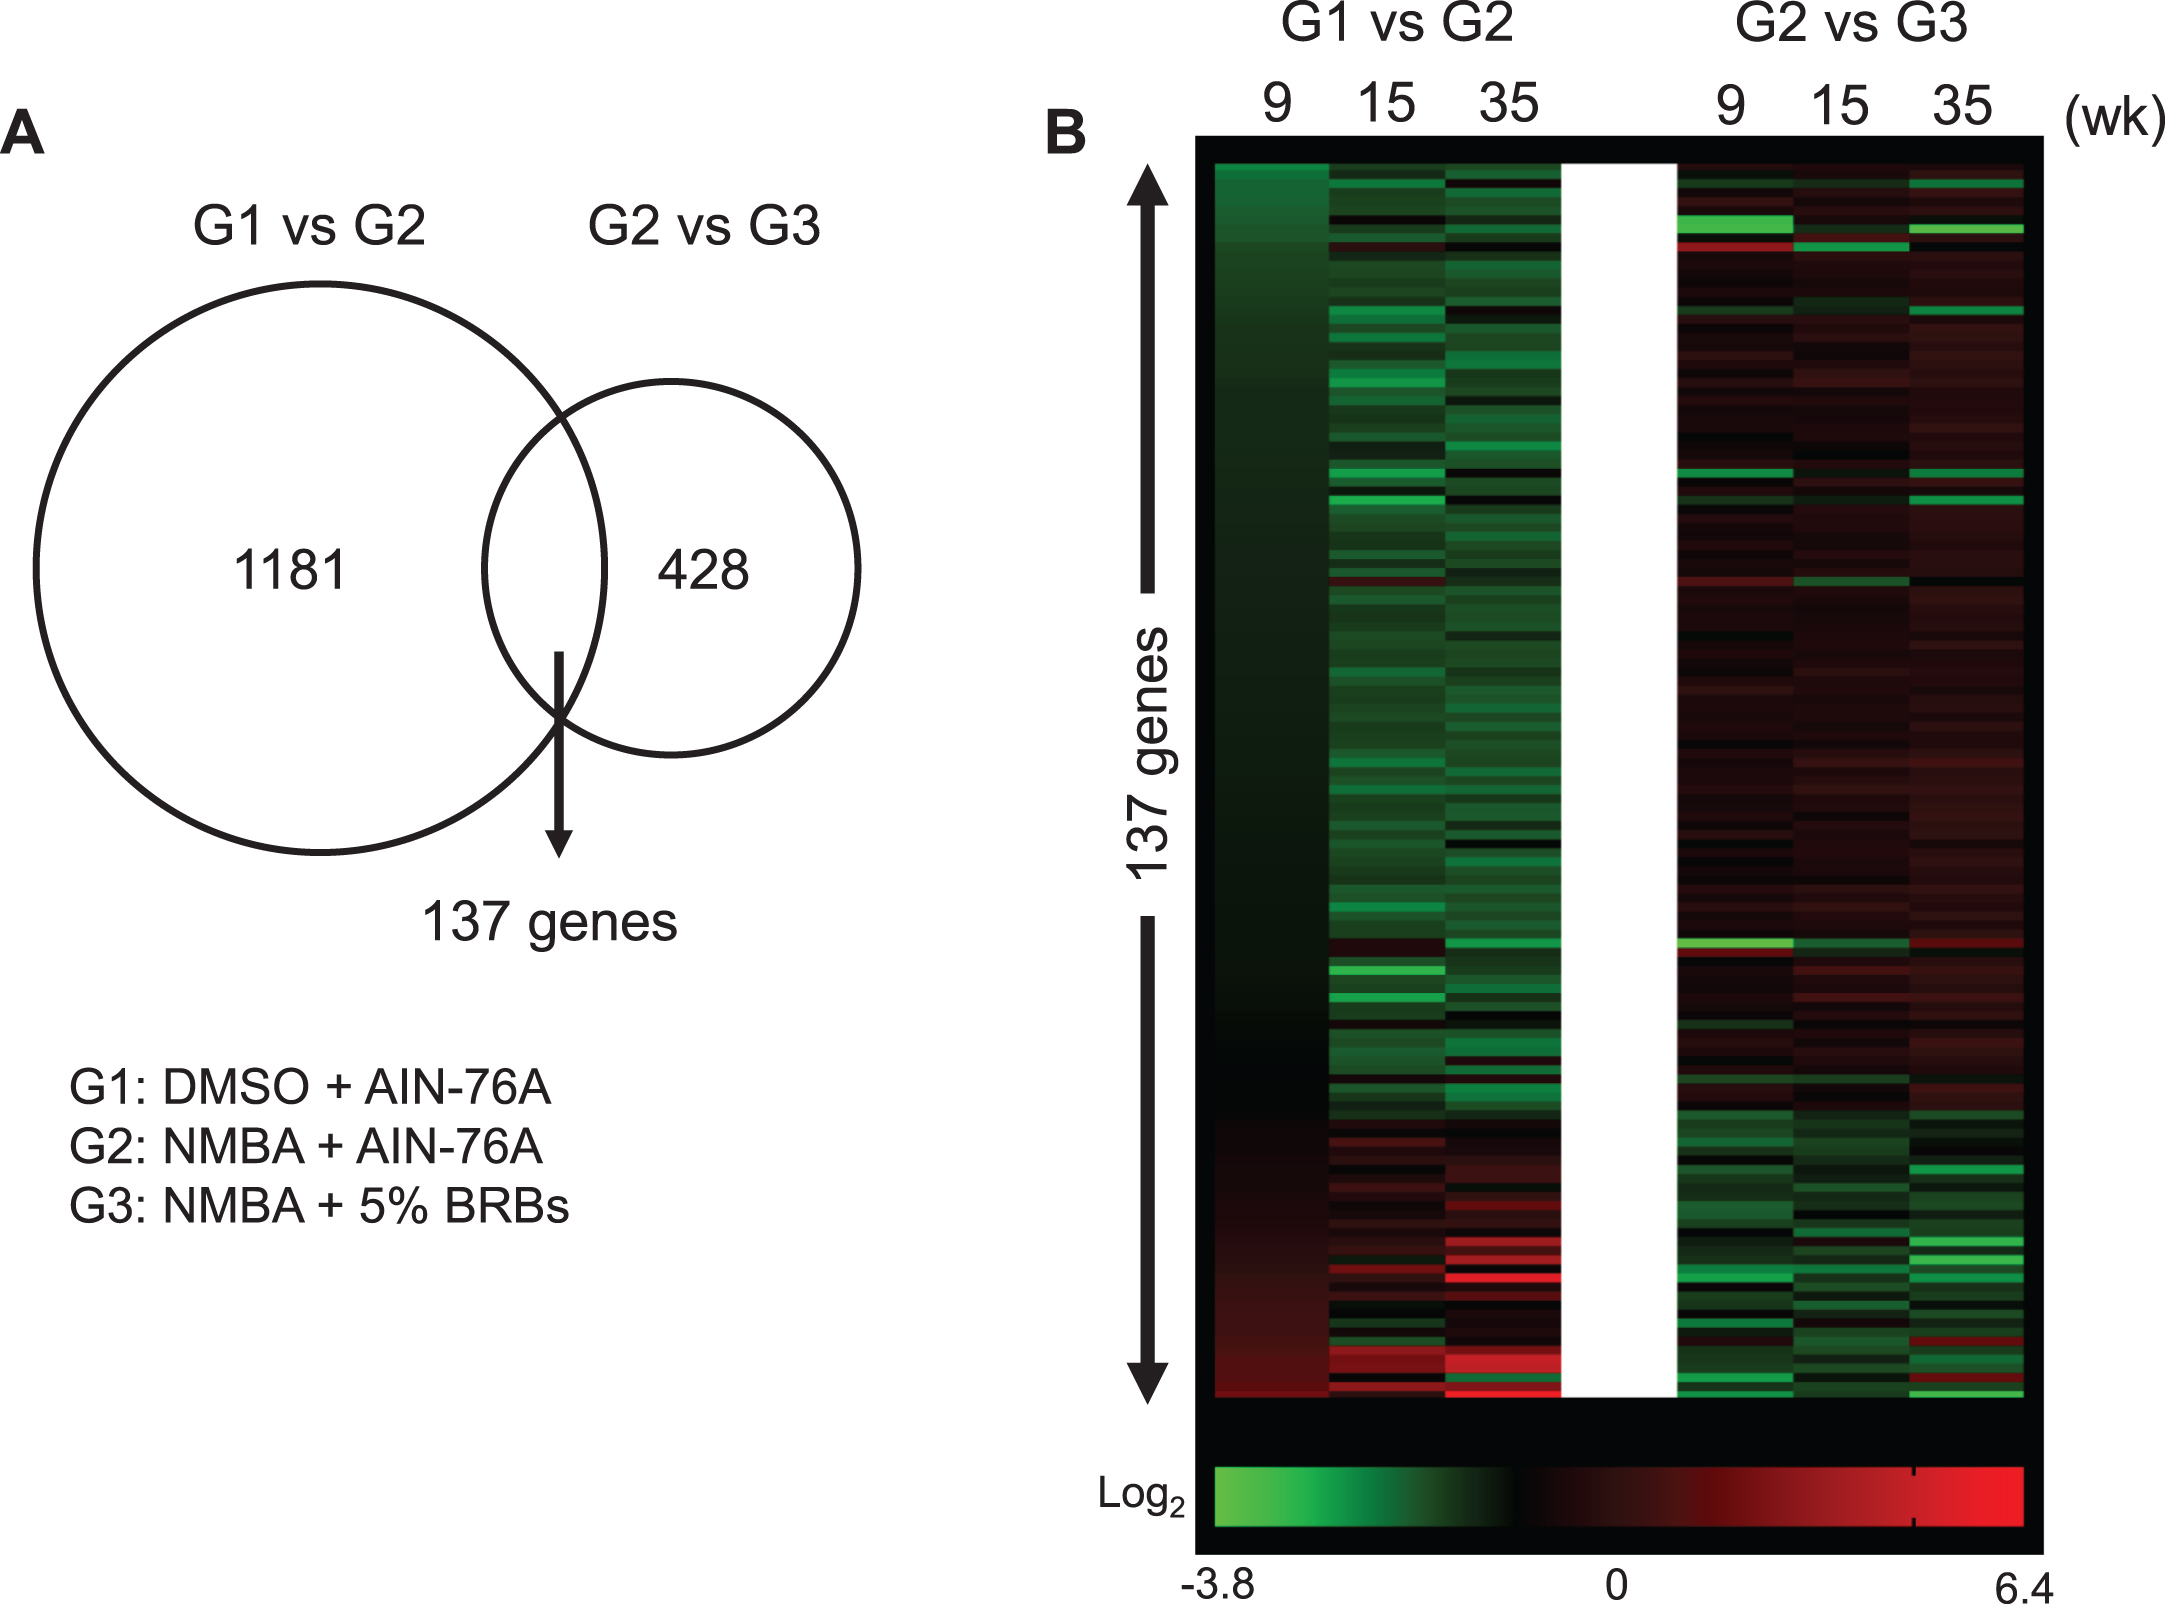 BRBs significantly regulated expression levels of 137 genes that were changed by NMBA. (A) 1181 and 428 genes were significantly changed in the comparison between G1 and G2, and between G2 and G3, respectively. There are 137 common genes between 1181 and 428 gene sets. (B) Heatmap showed relative expression levels of 137 genes.